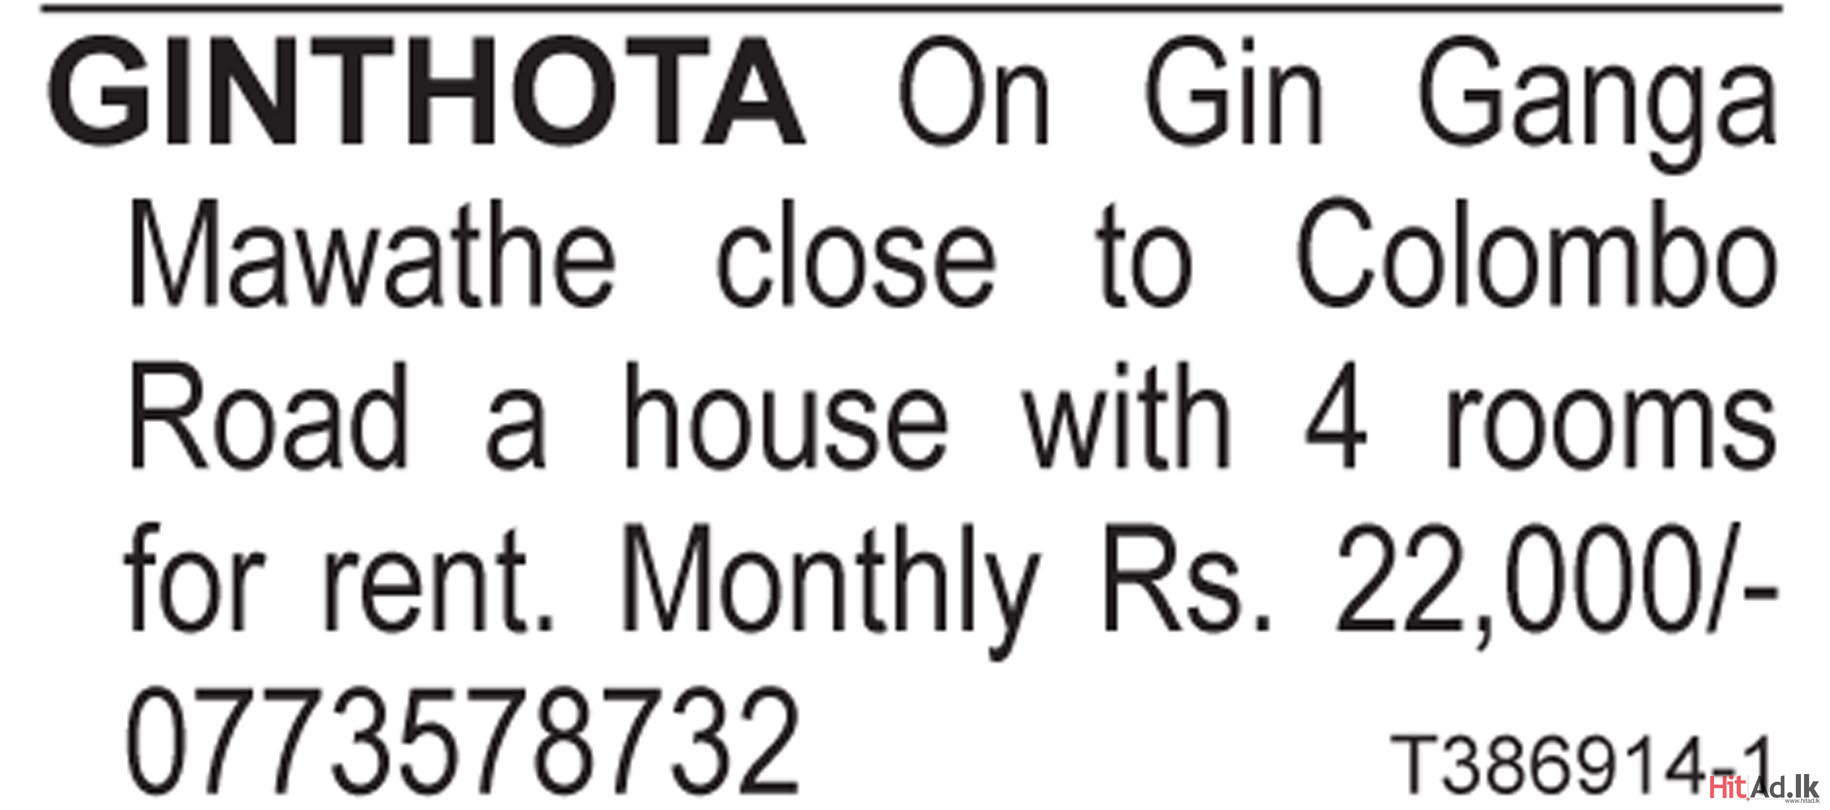 House with 4 rooms for rent in Ginthota